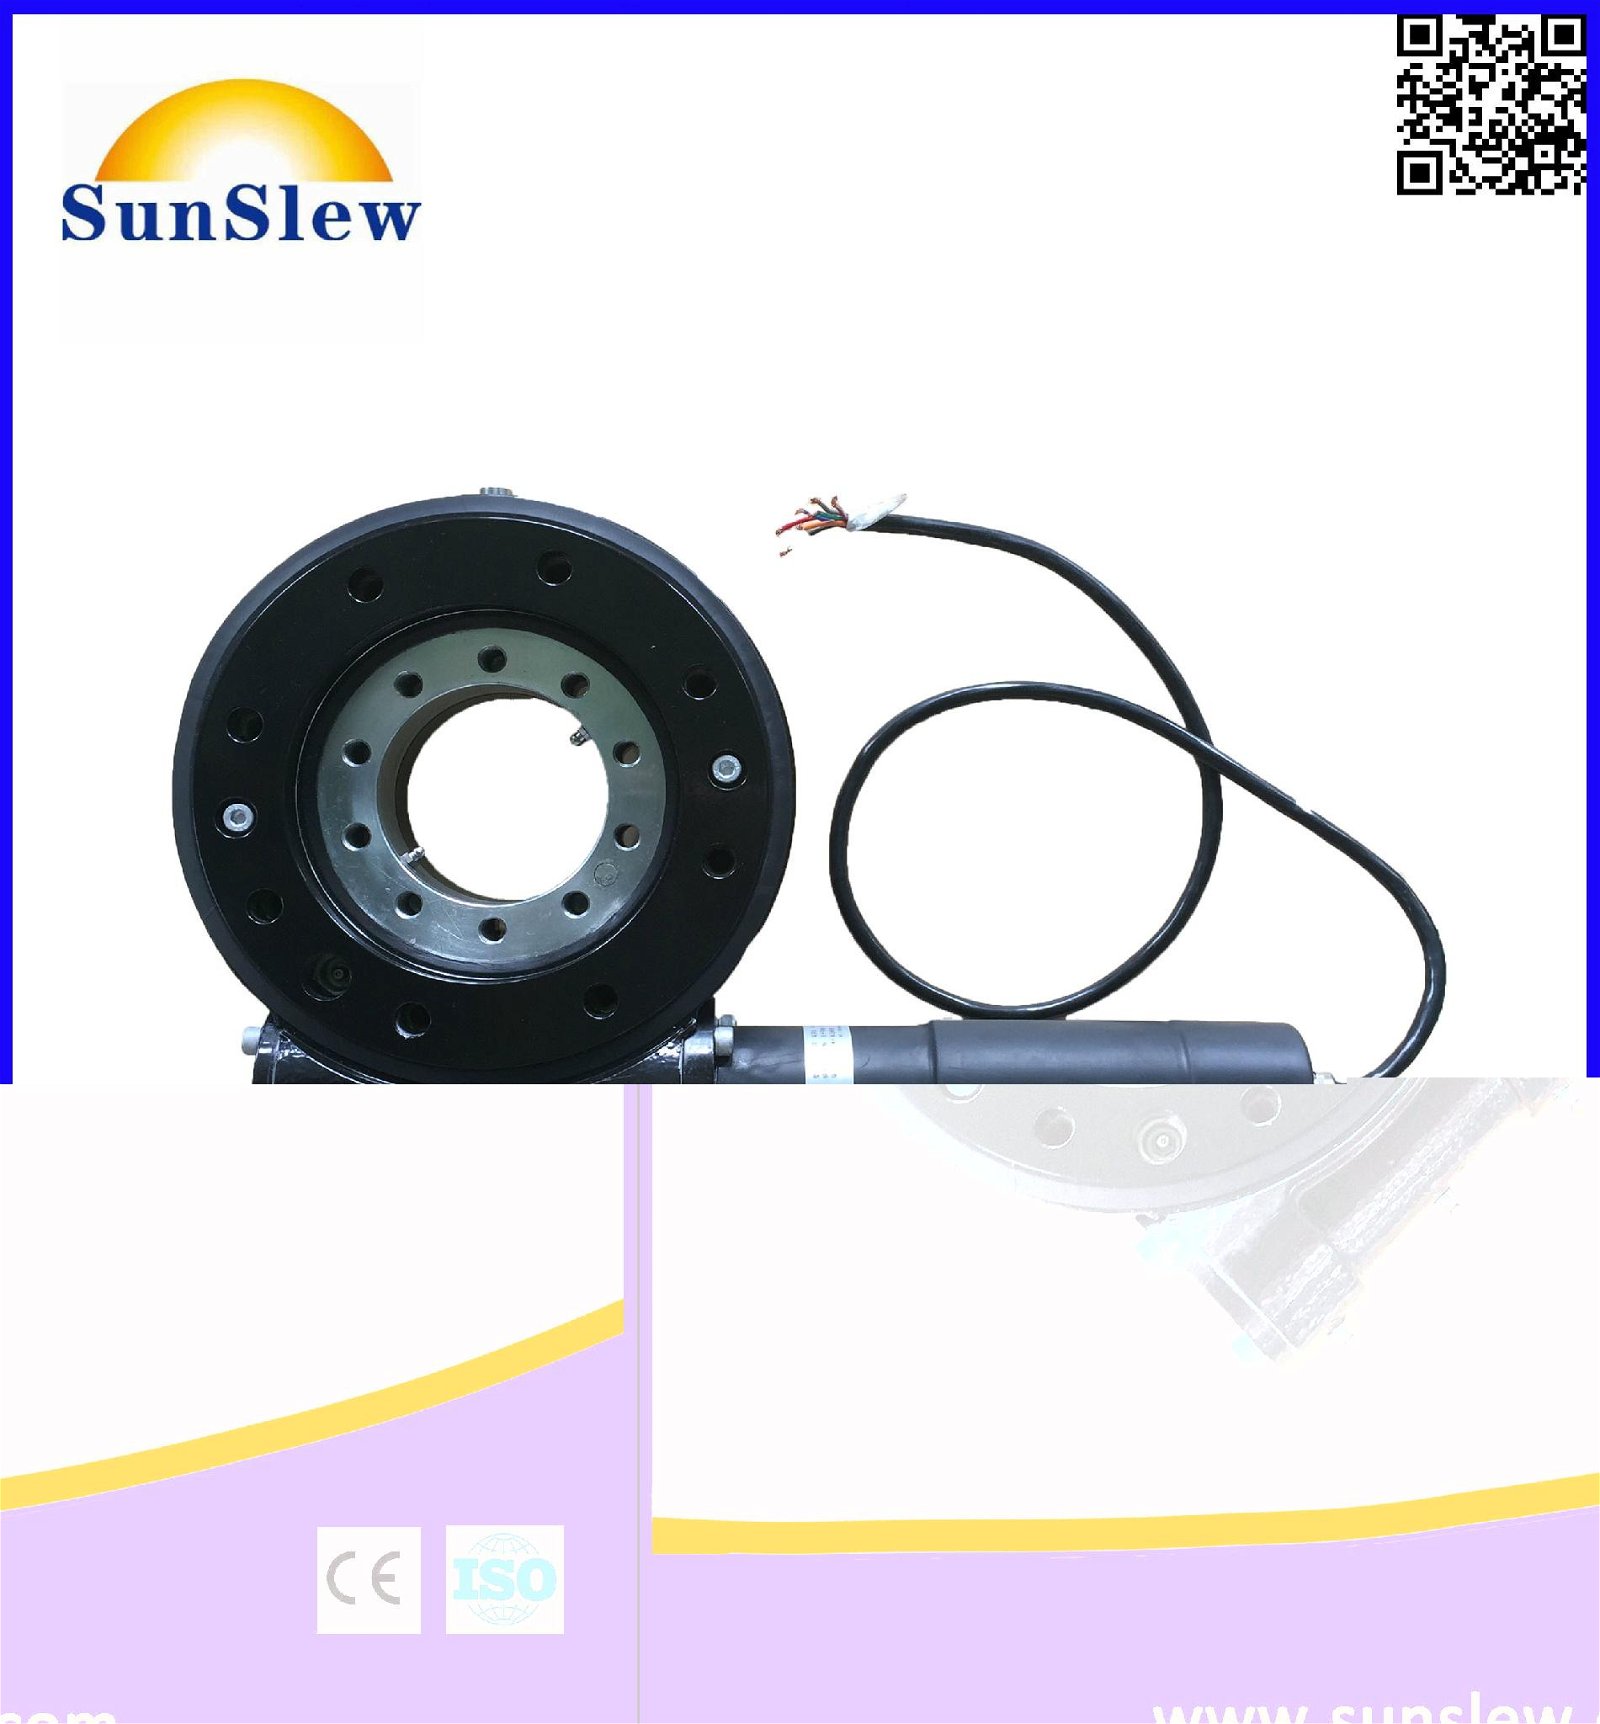 Sunslew SD7 slewing drive 1